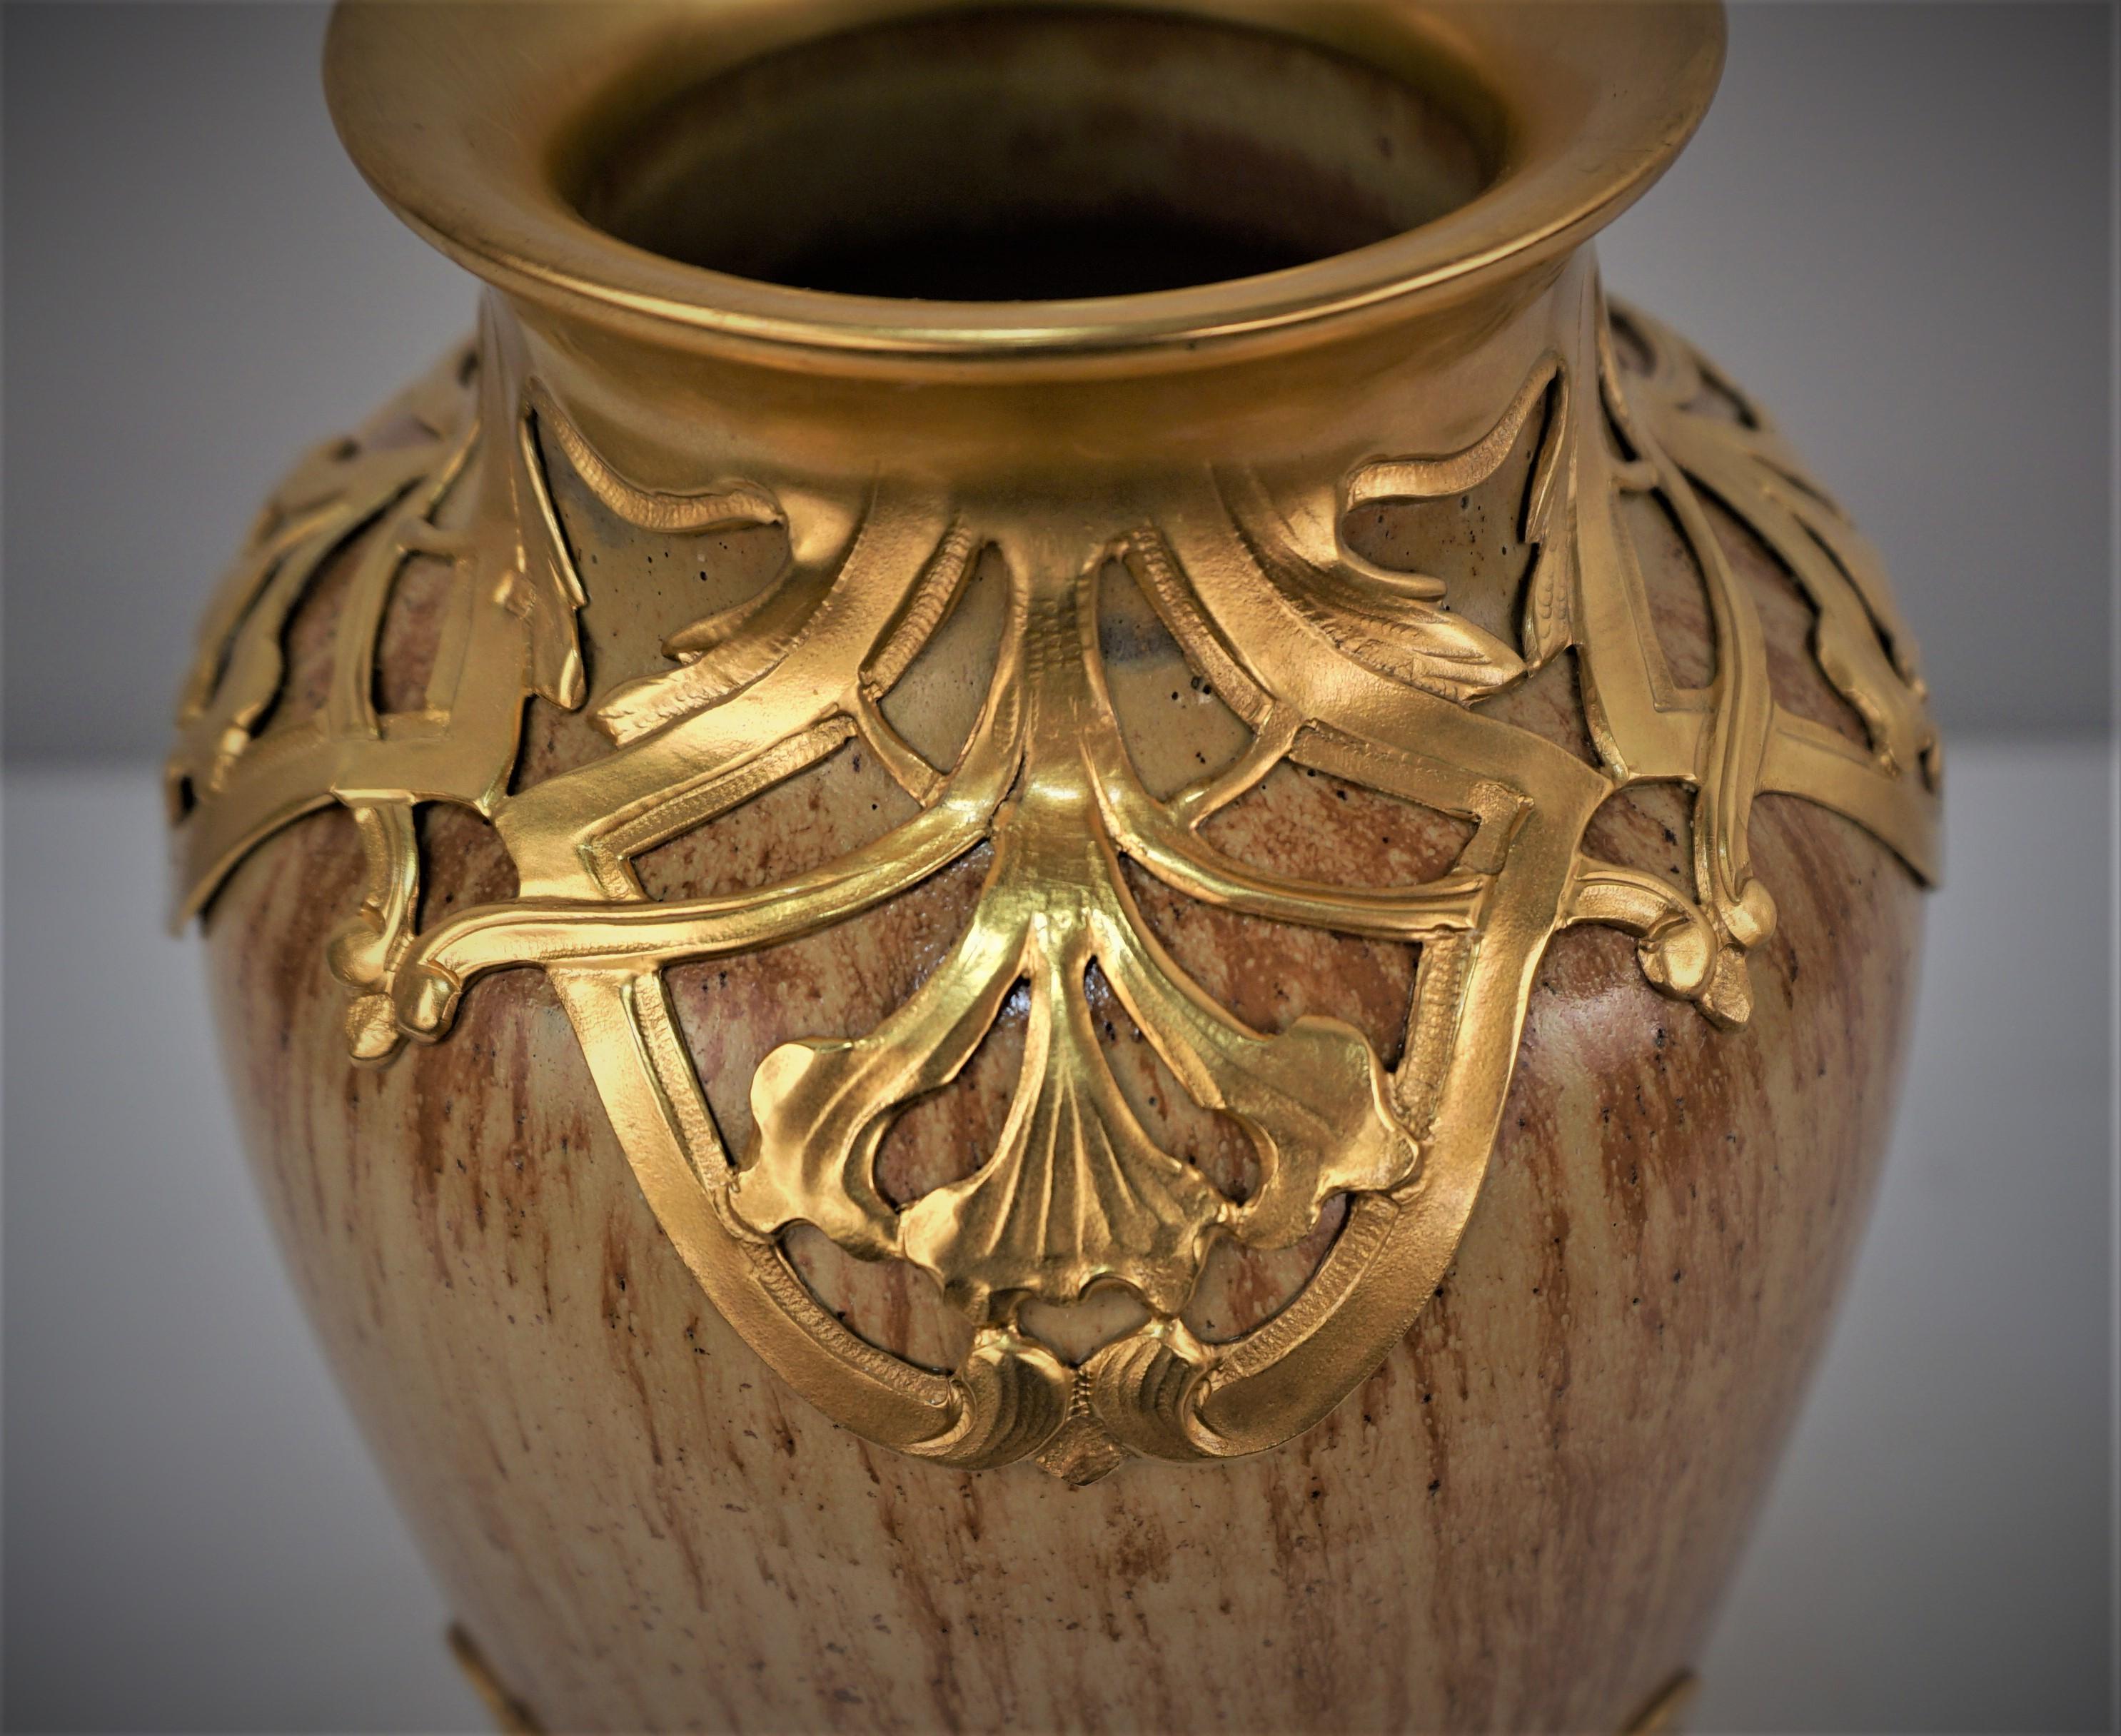 A very fine and impressive French late 19th century art nouveau pottery vase overlaid with gold over silver decoration.
Gold over silver has mark of E F and image of anchor in the middle.